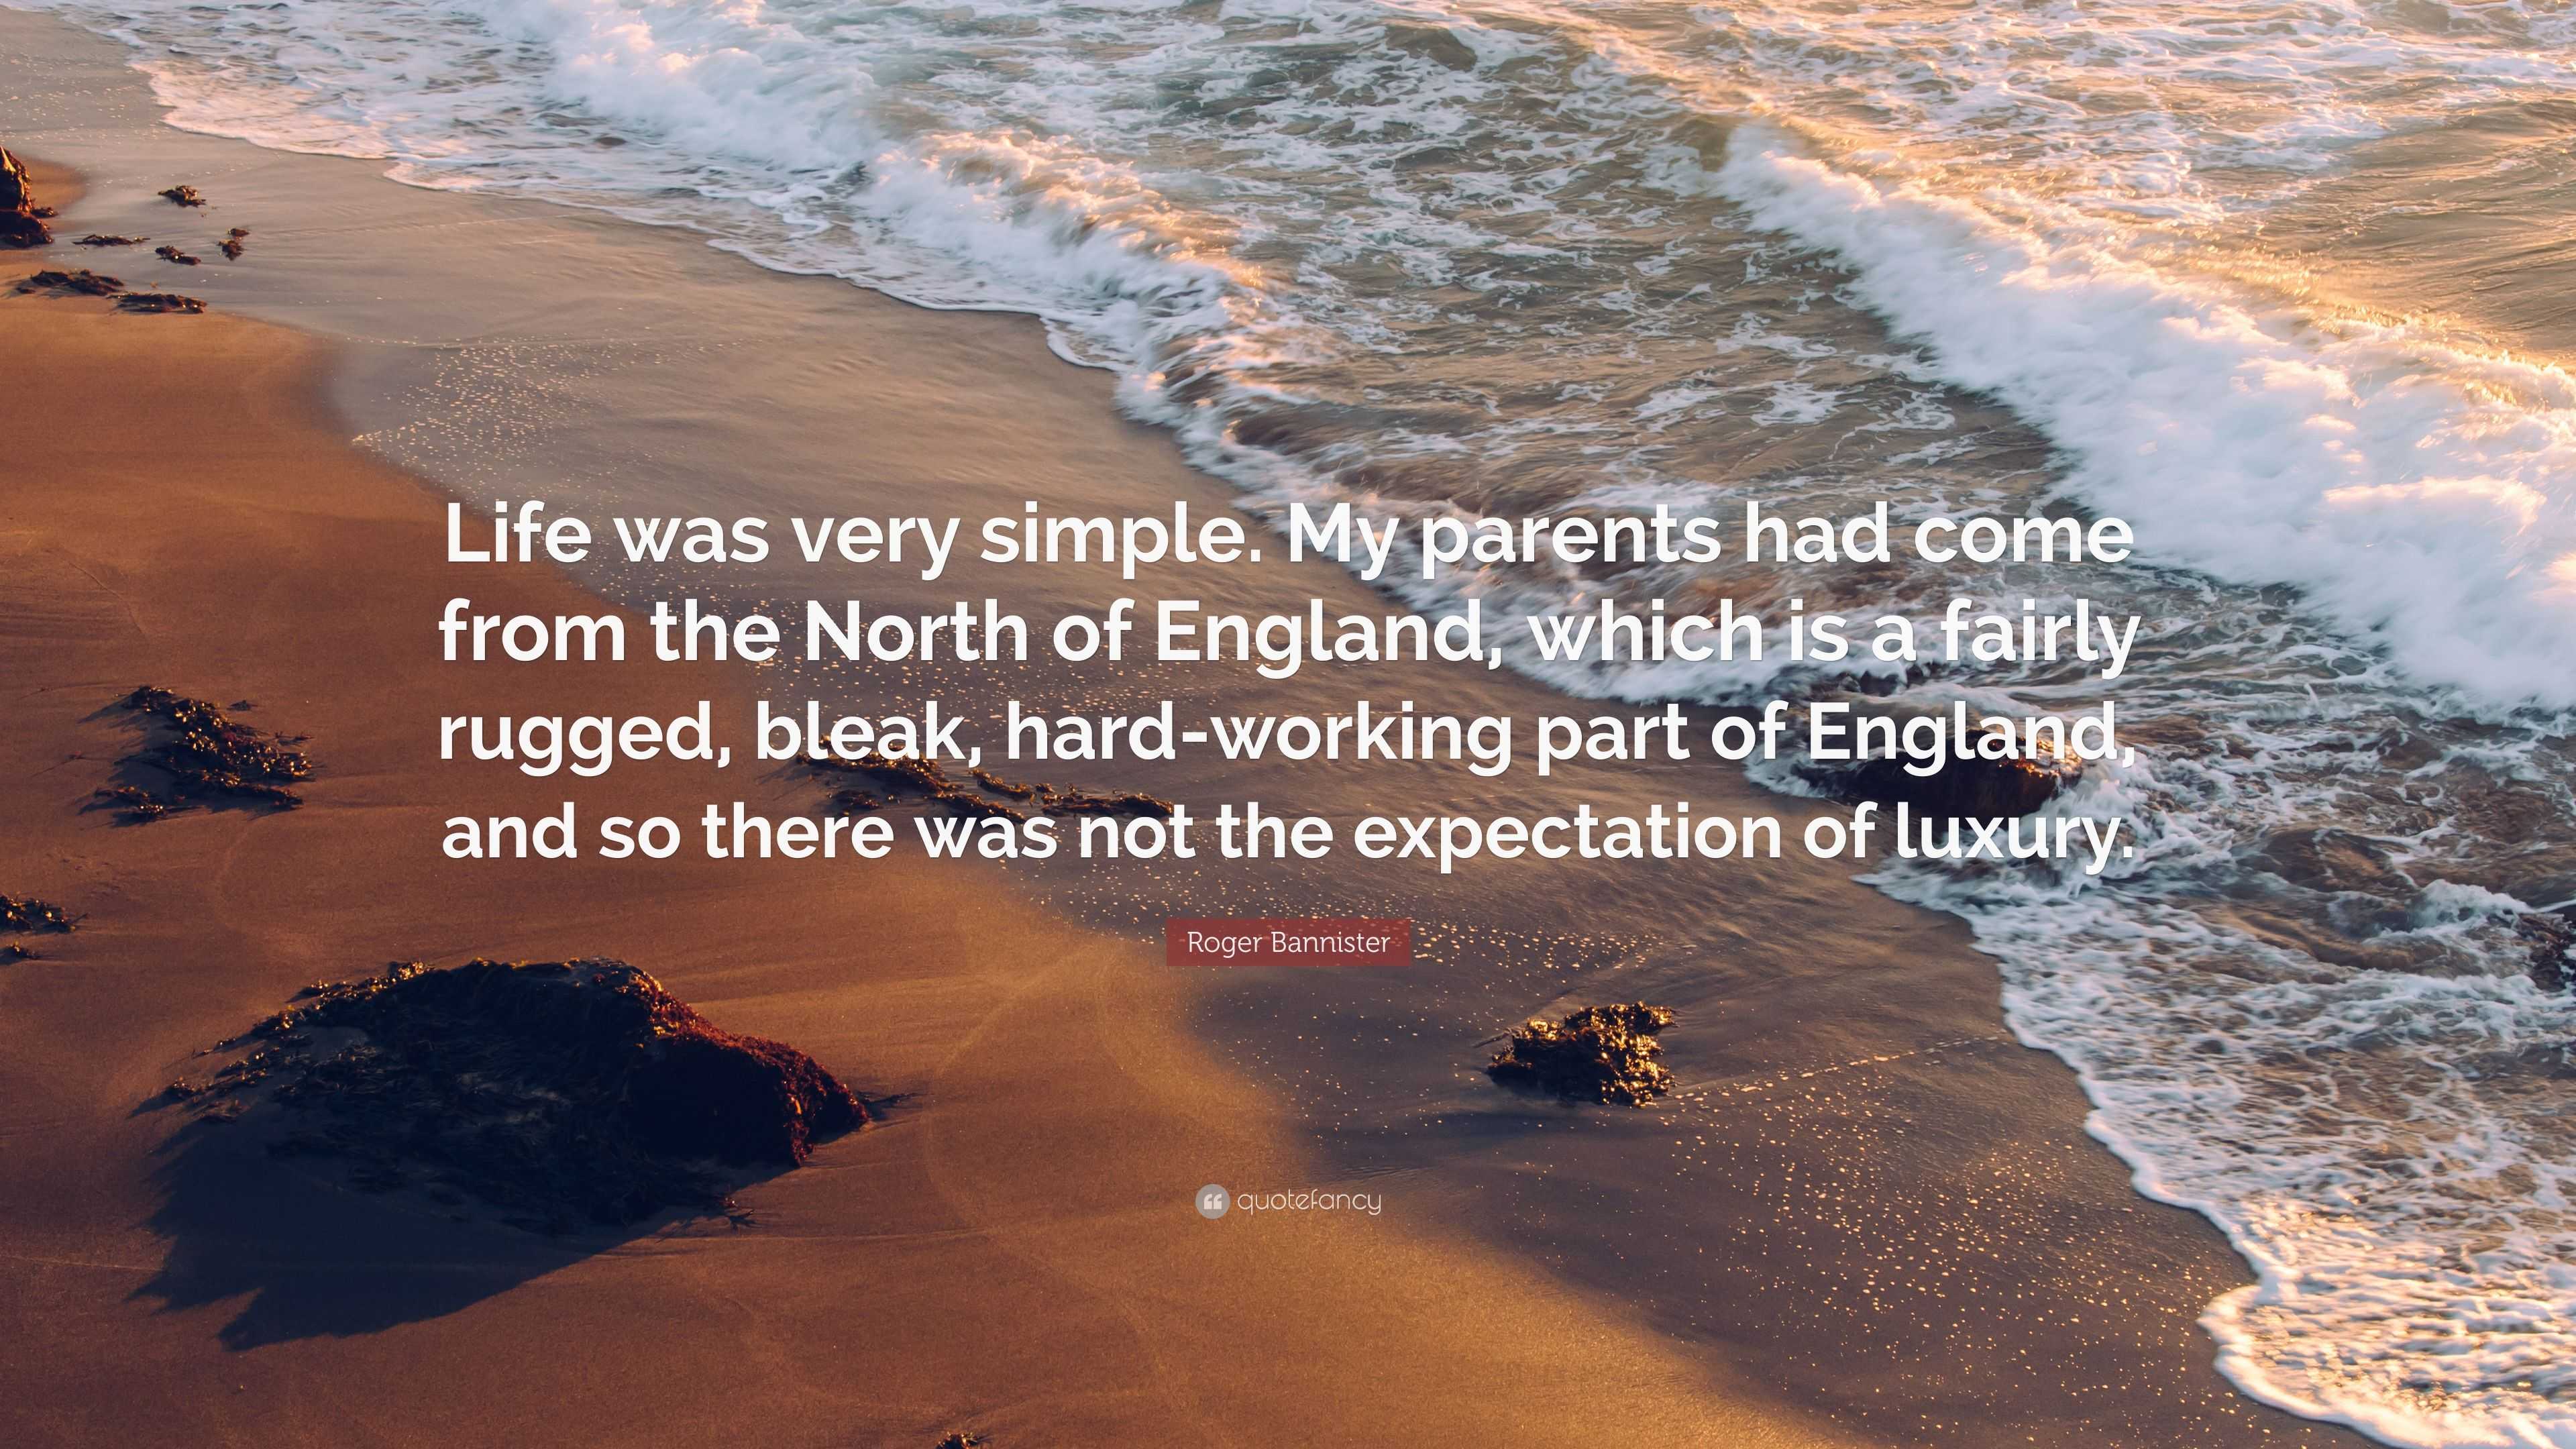 Roger Bannister Quote: "Life was very simple. My parents ...